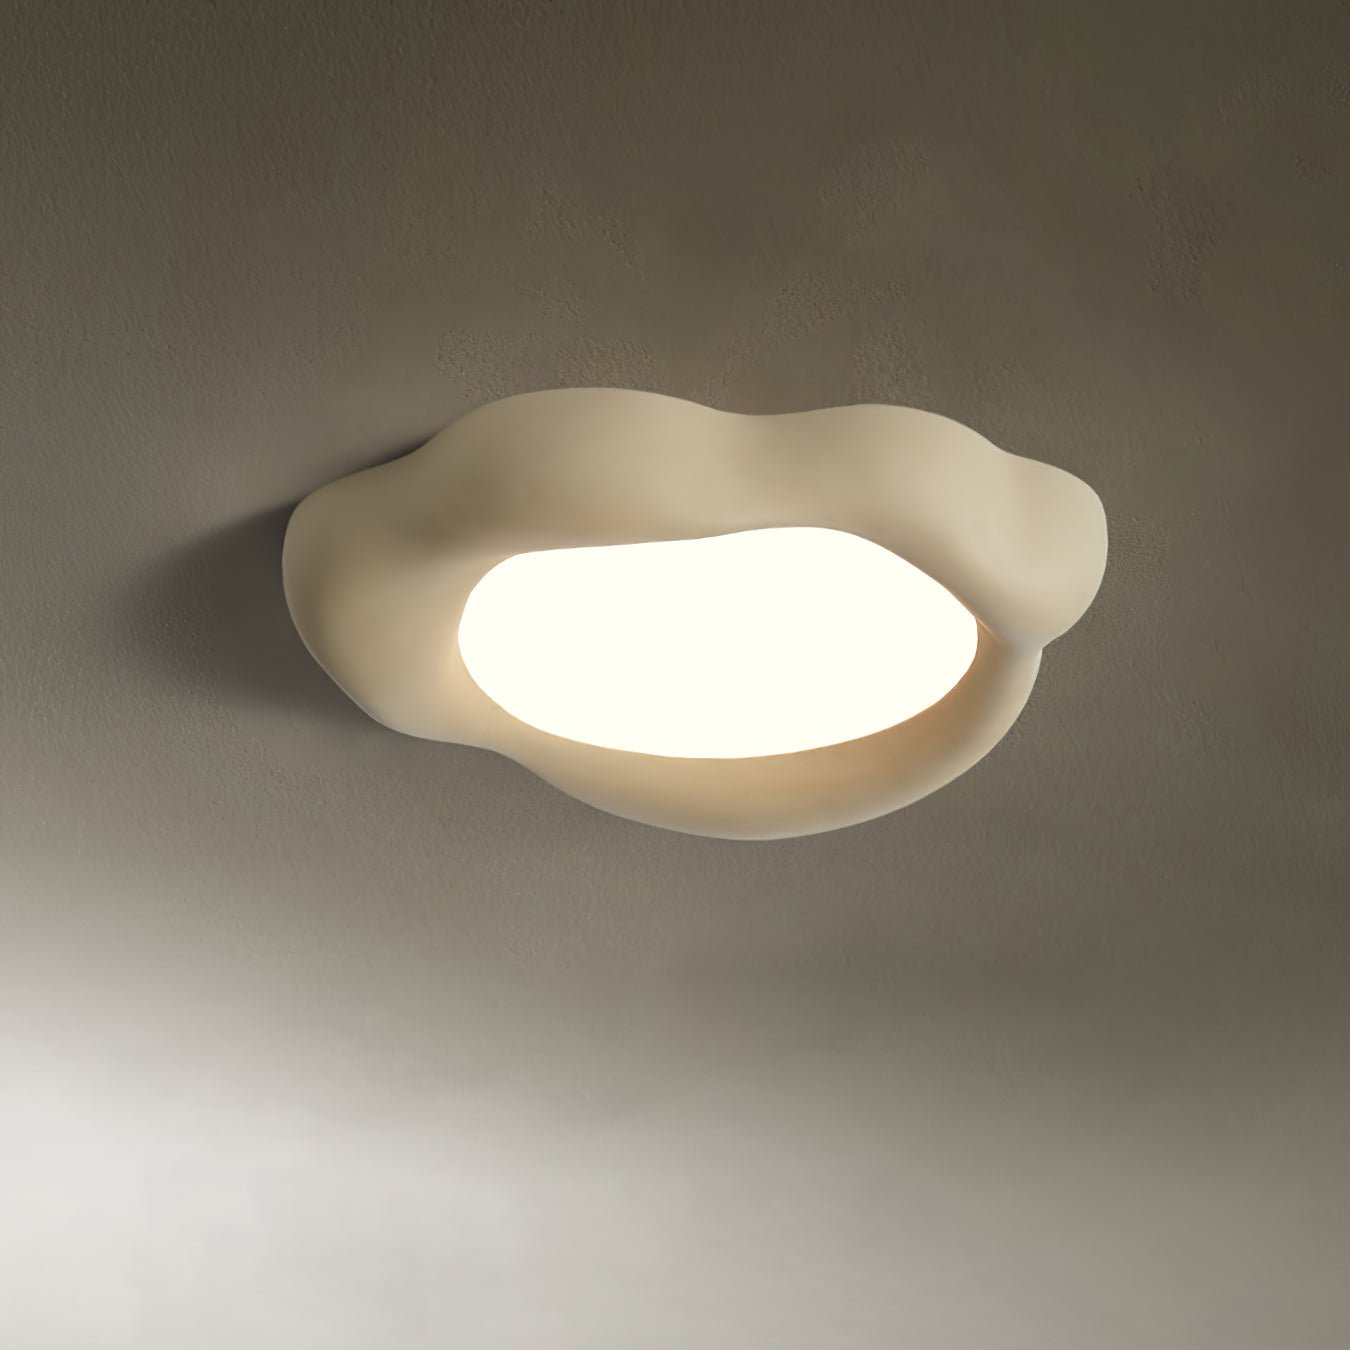 Beige Cool White Kumo Ceiling Lamp in 21.6" diameter and 3.9" height (55cm x 10cm)